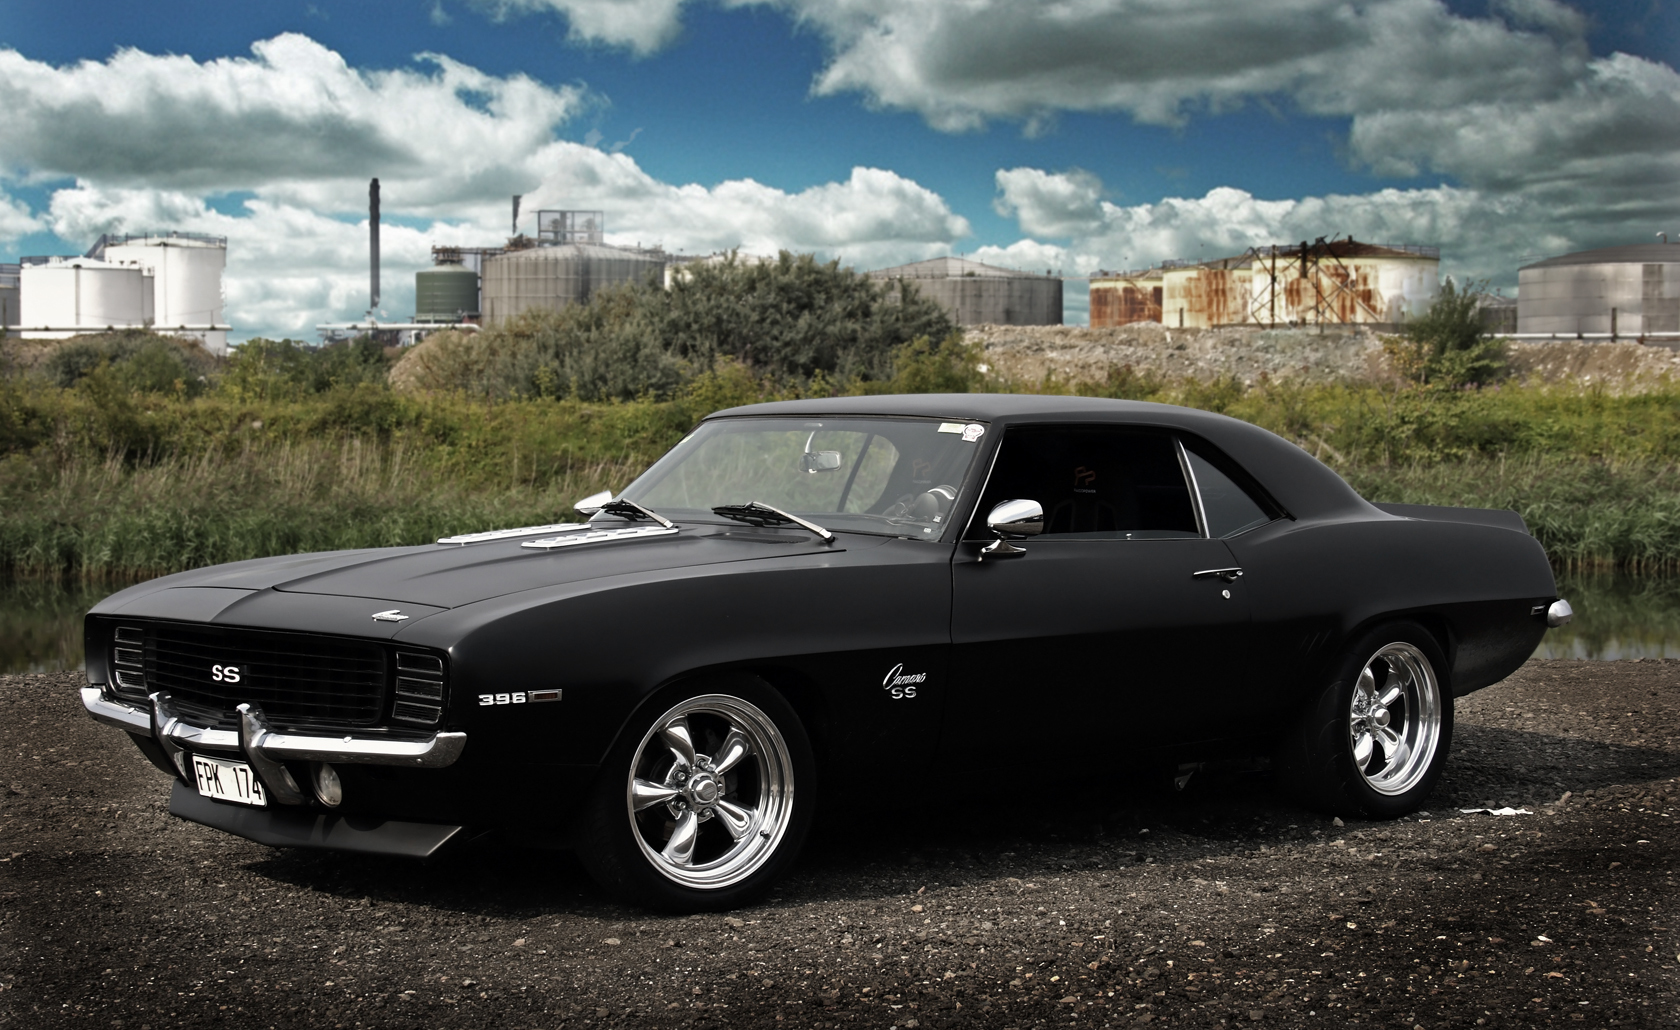  Wallpapers on Muscle Cars Chevrolet Camaro Ss Hd Wallpaper   Cars   Trucks   715511